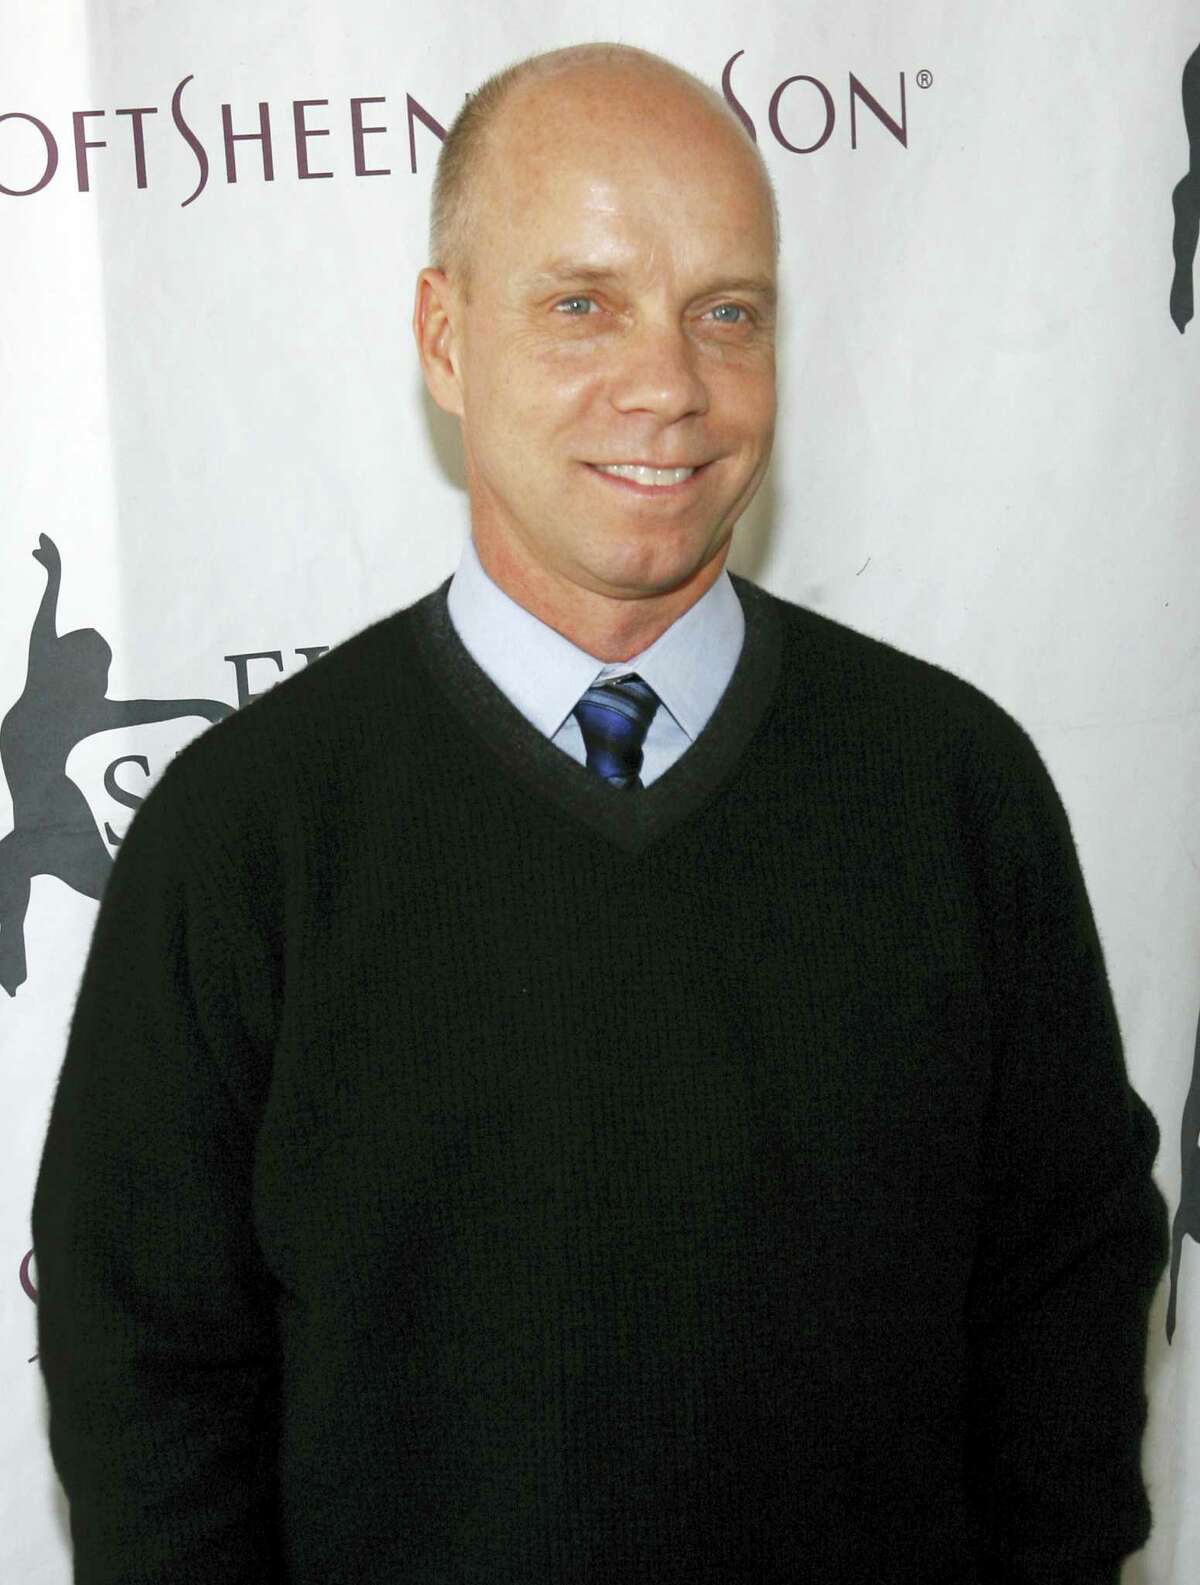 In this April 9, 2007 photo, former Olympic figure skating gold medalist Scott Hamilton arrives for Figure Skating In Harlem’s annual gala “Skating with the Stars” at Central Park’s Wollman Rink in New York. Hamilton told People magazine for a story published online on Oct. 23, 2016, that he has been diagnosed with another brain tumor.